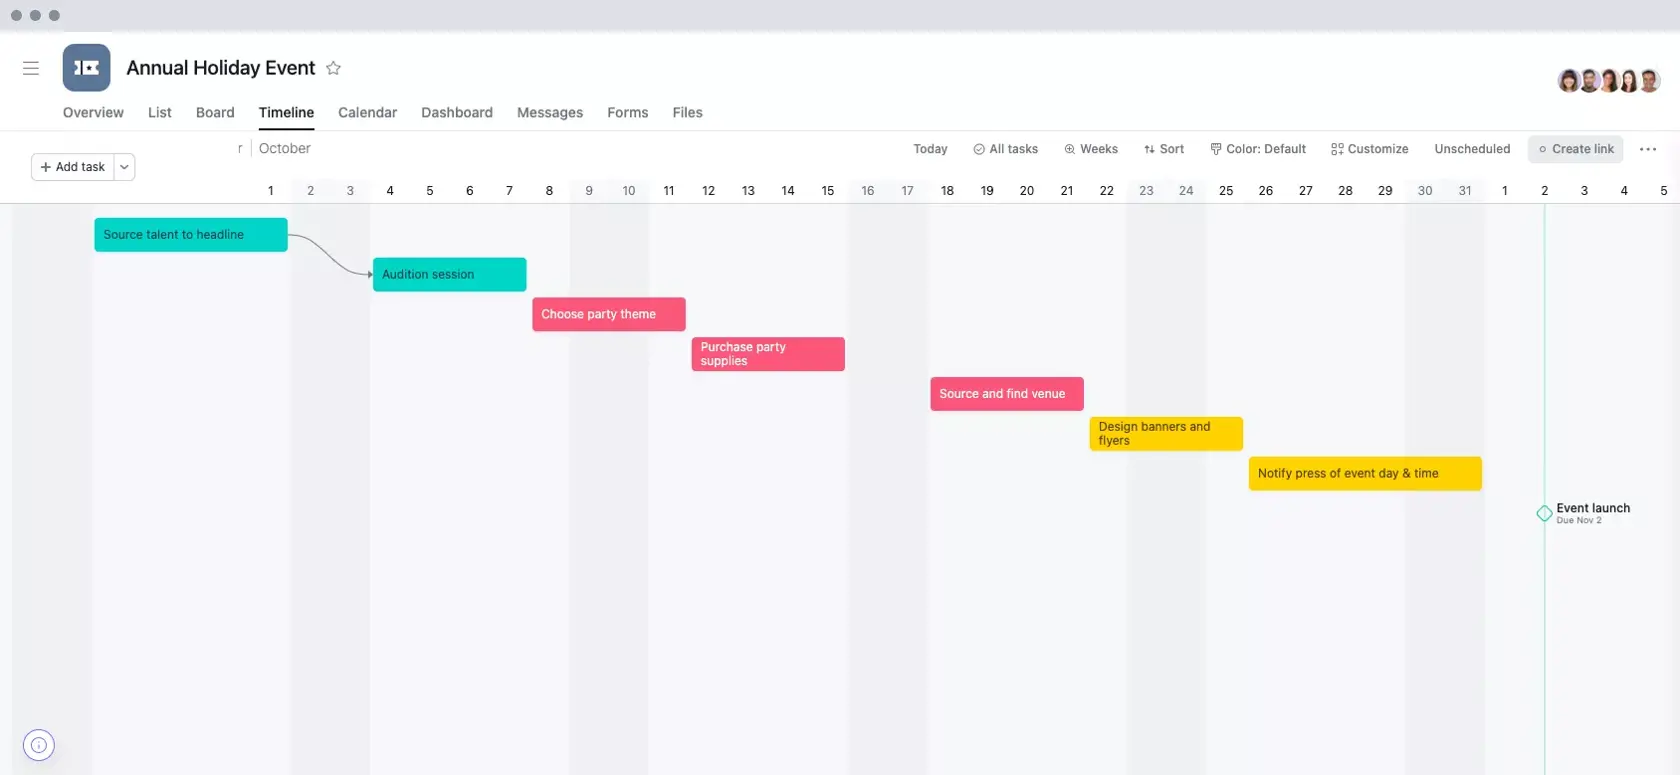 [Old Product UI] Project in Asana before fast tracking (Timeline View)